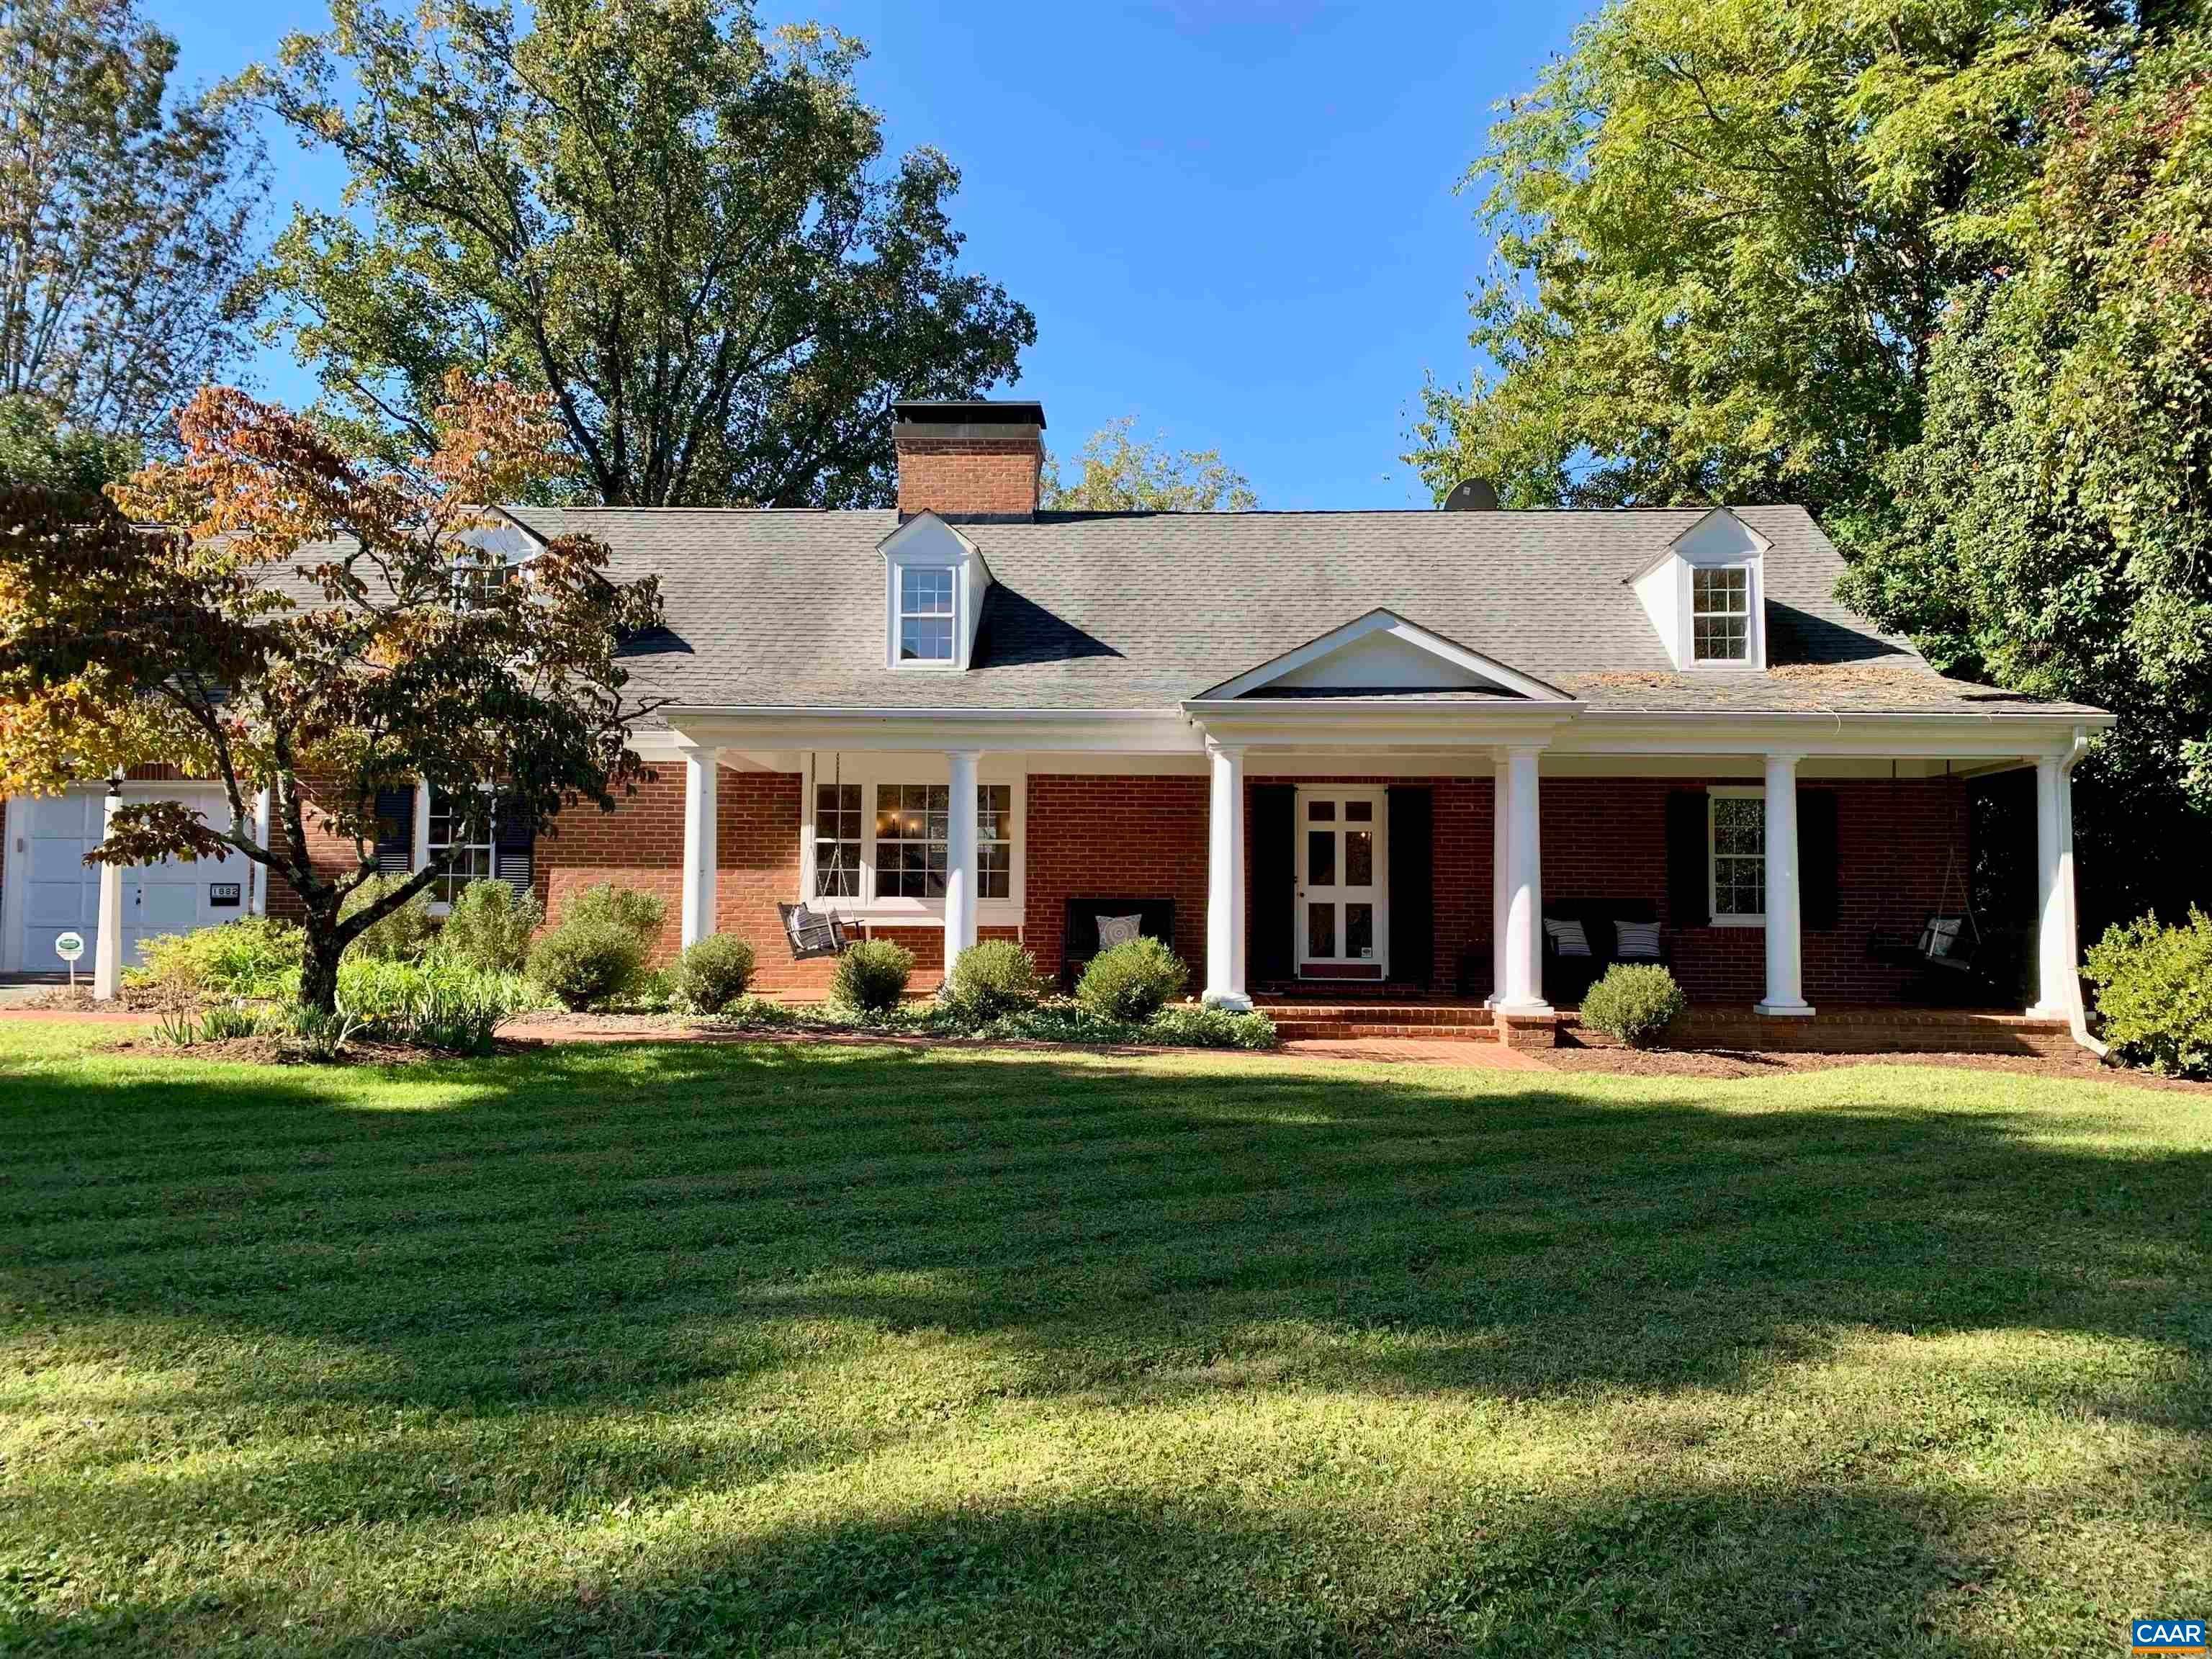 47. Single Family Homes for Sale at 1882 WESTVIEW Road Charlottesville, Virginia 22903 United States